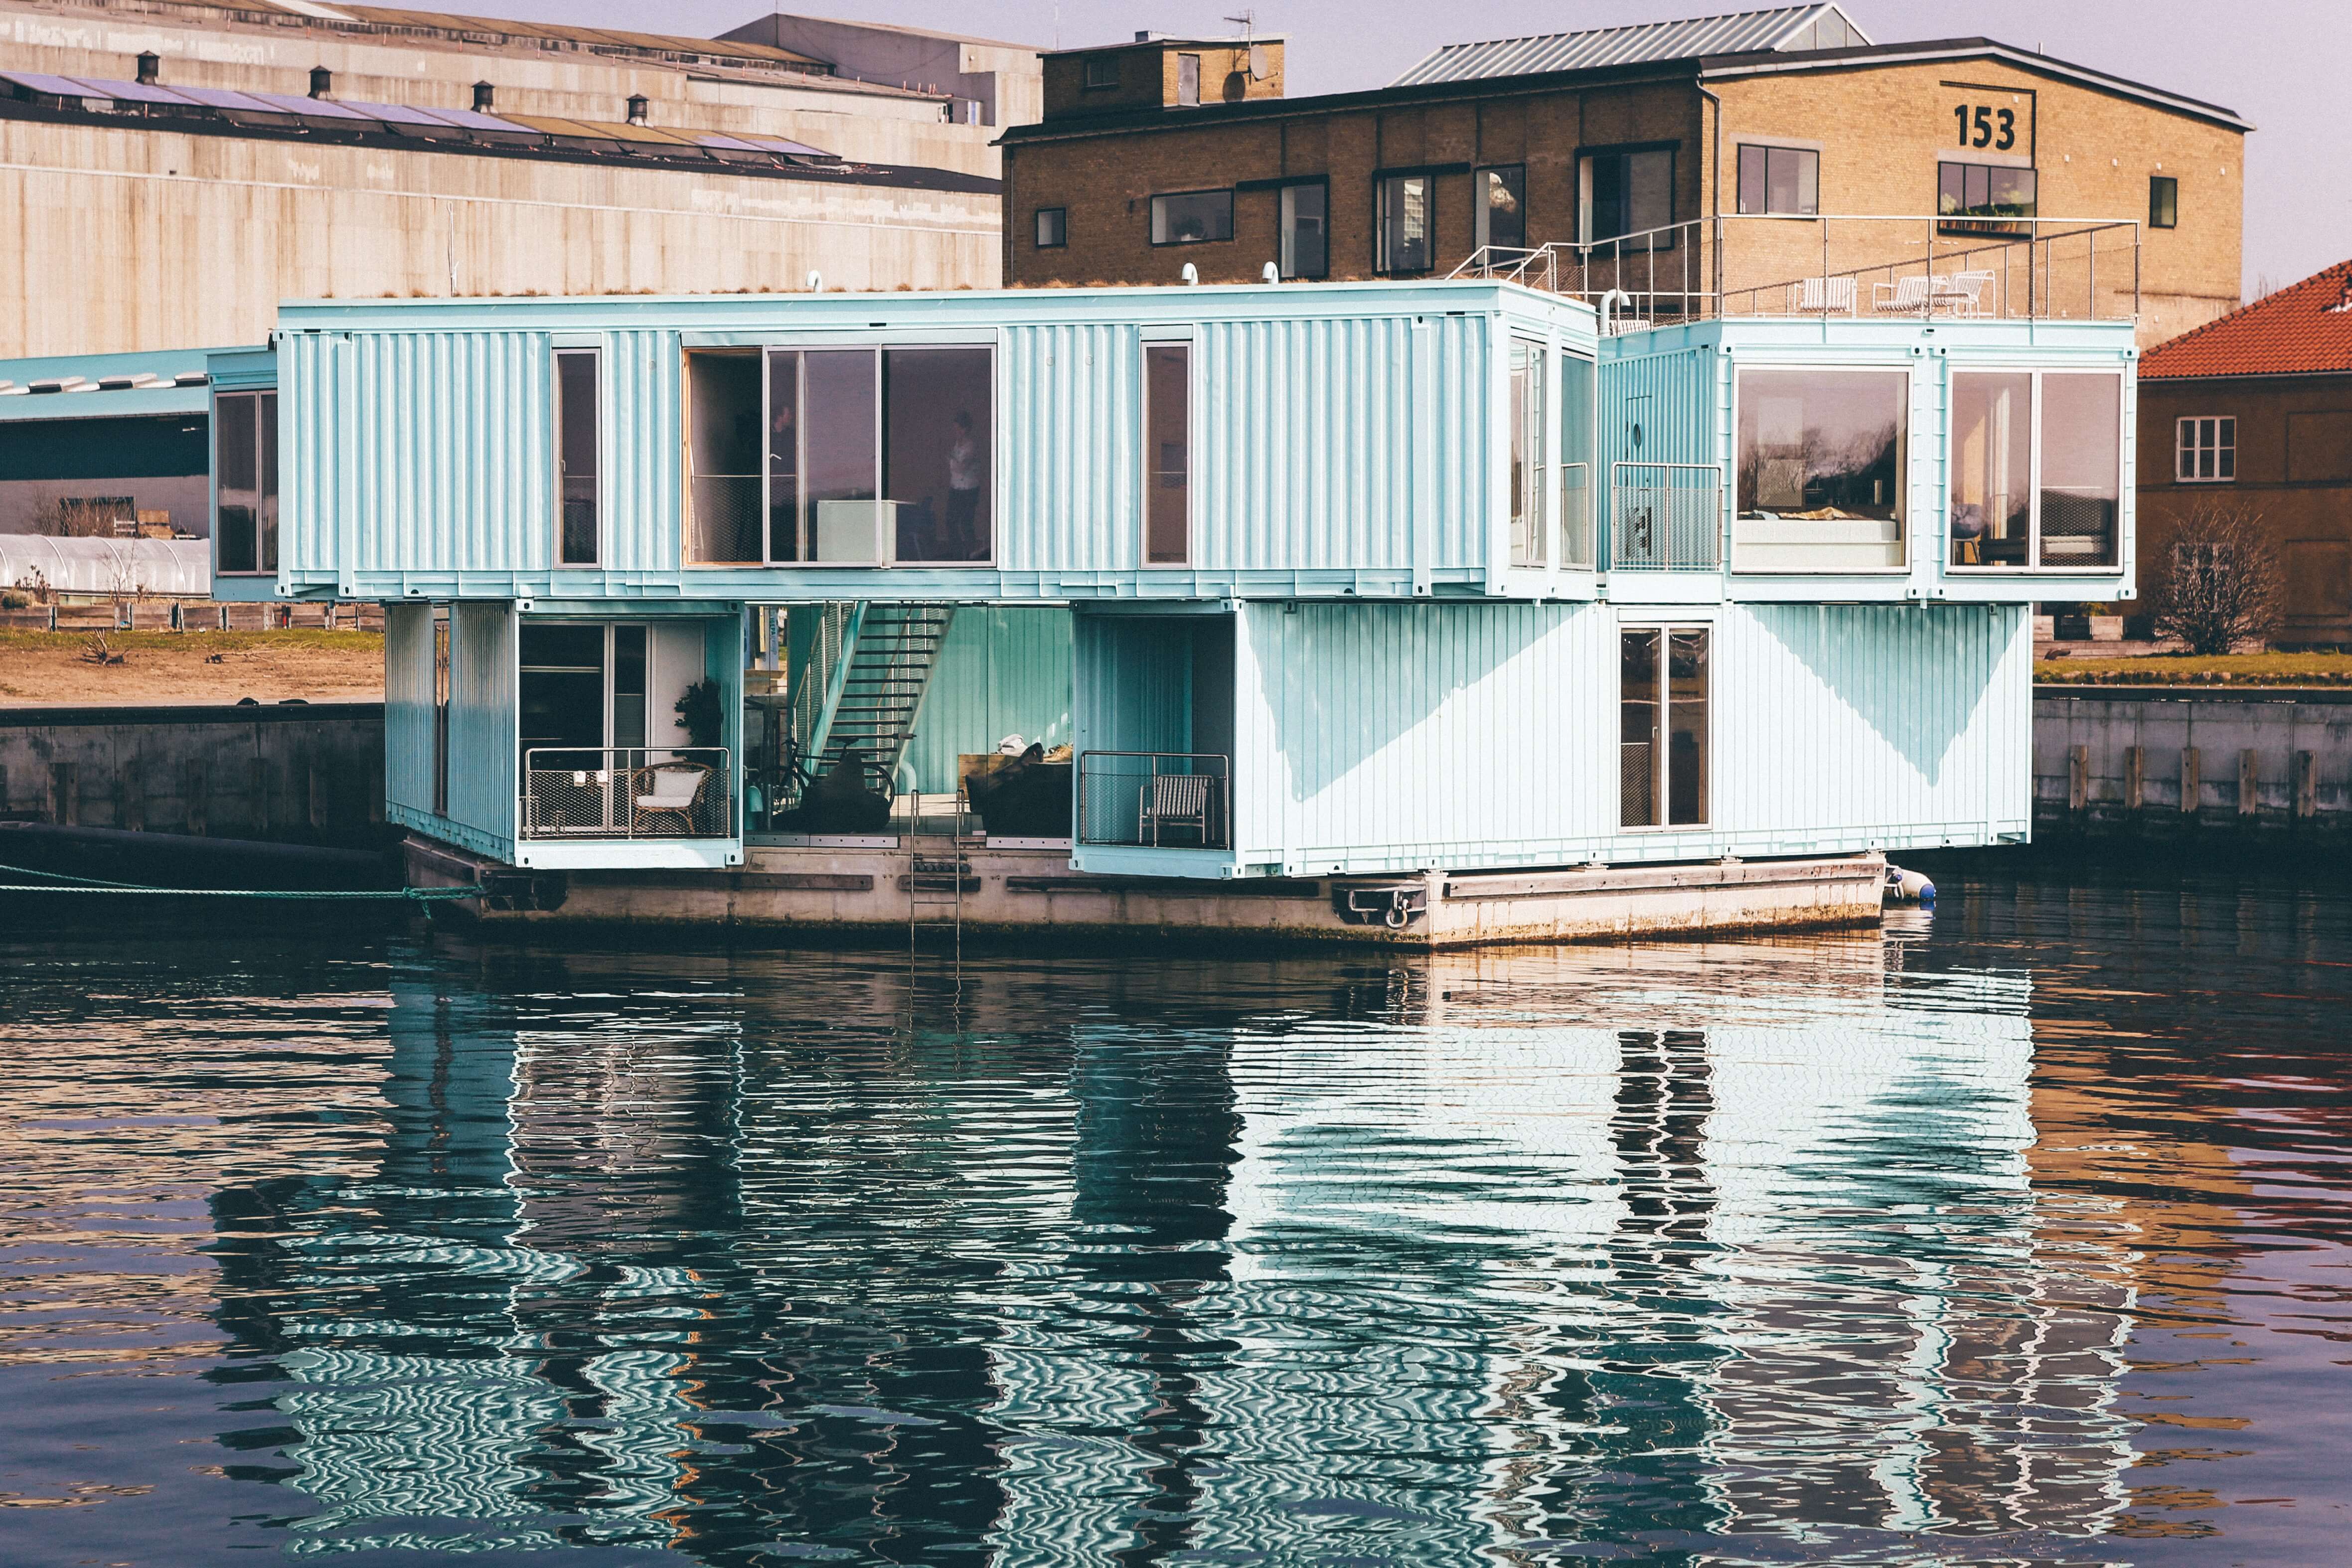 Nomad Adjacent container homes for sale image